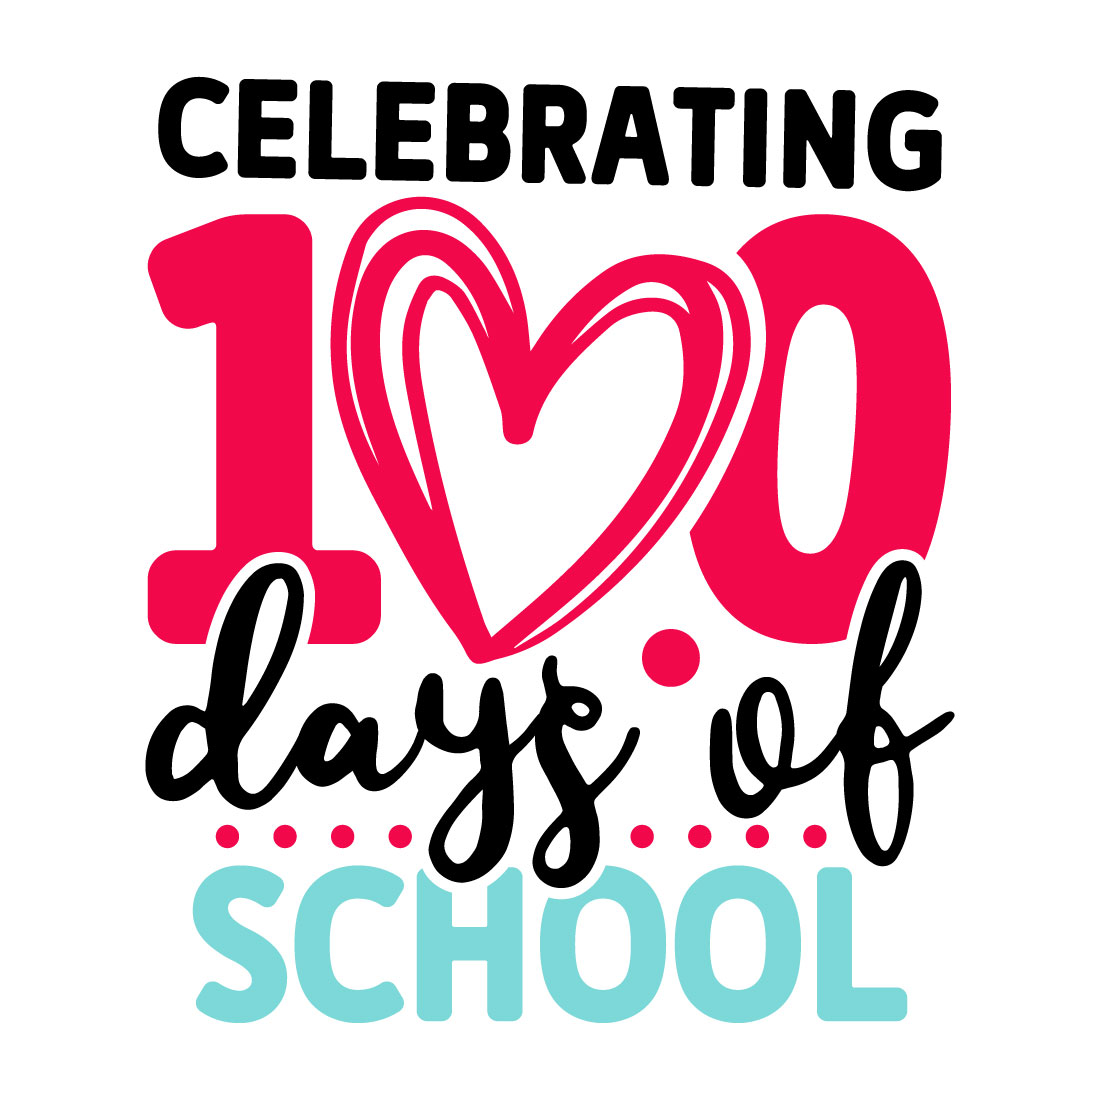 Image for prints with an elegant inscription Celebrating 100 Days Of School